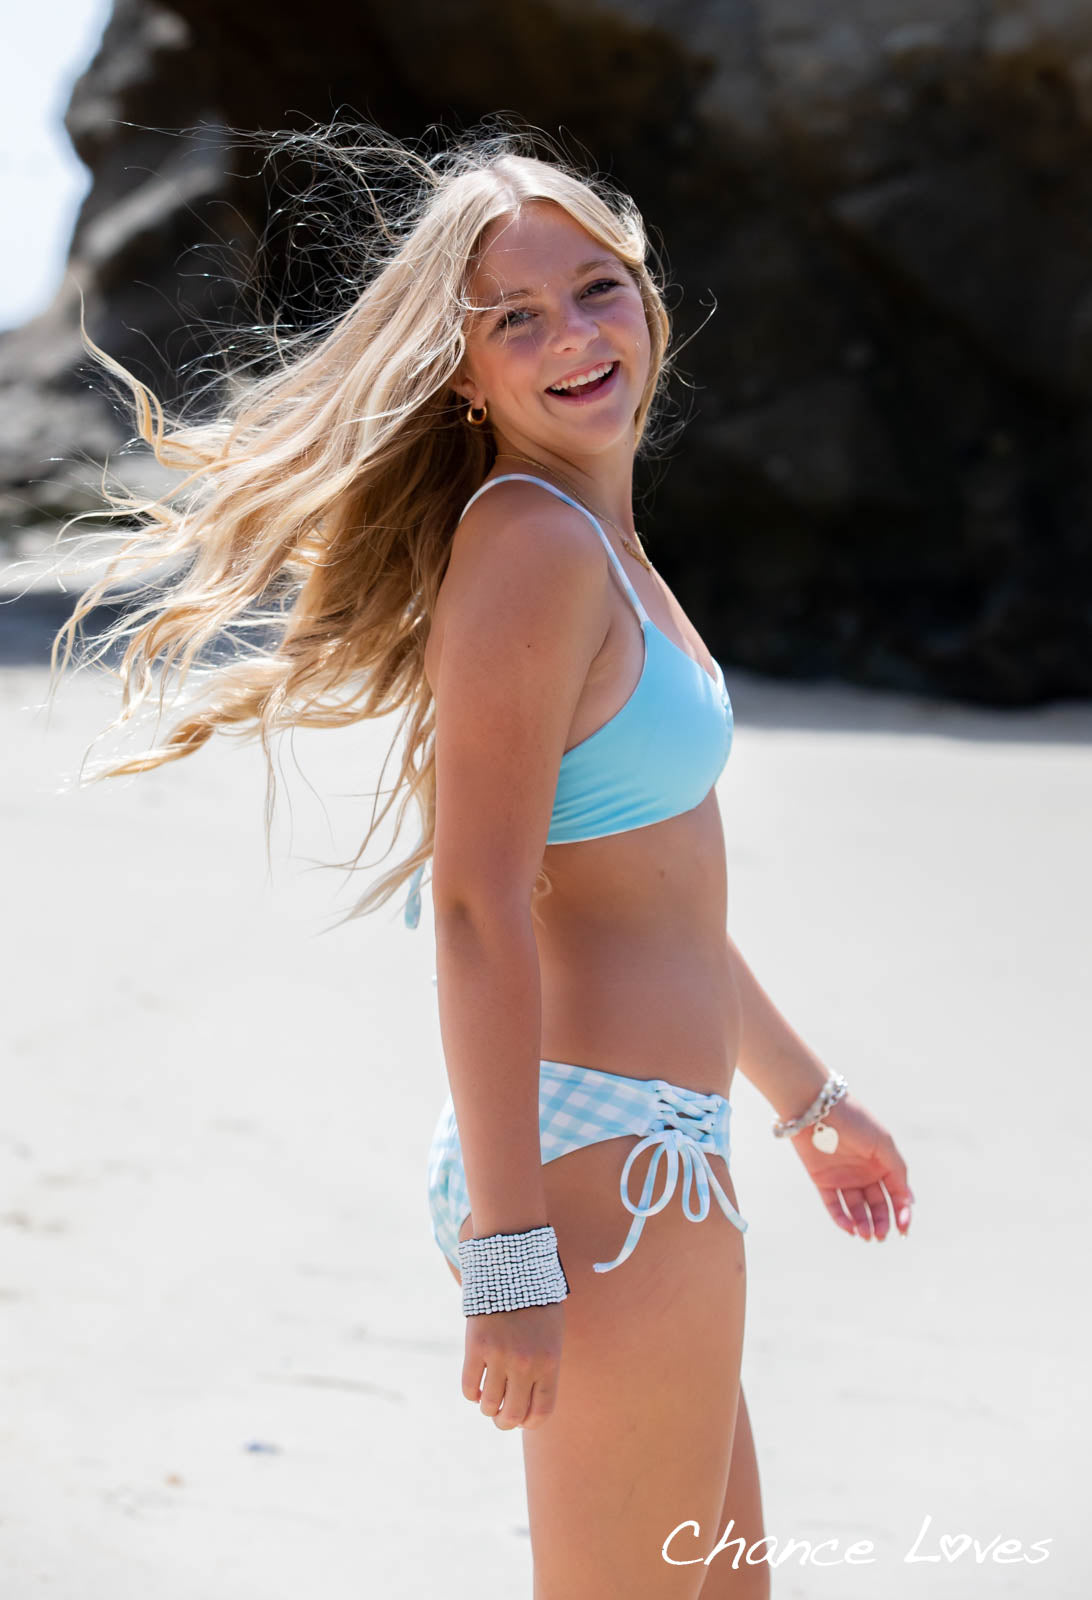 Reversible gingham blue-white swimsuit style with bralette top and matching swim pants for girls ages 10 through 18